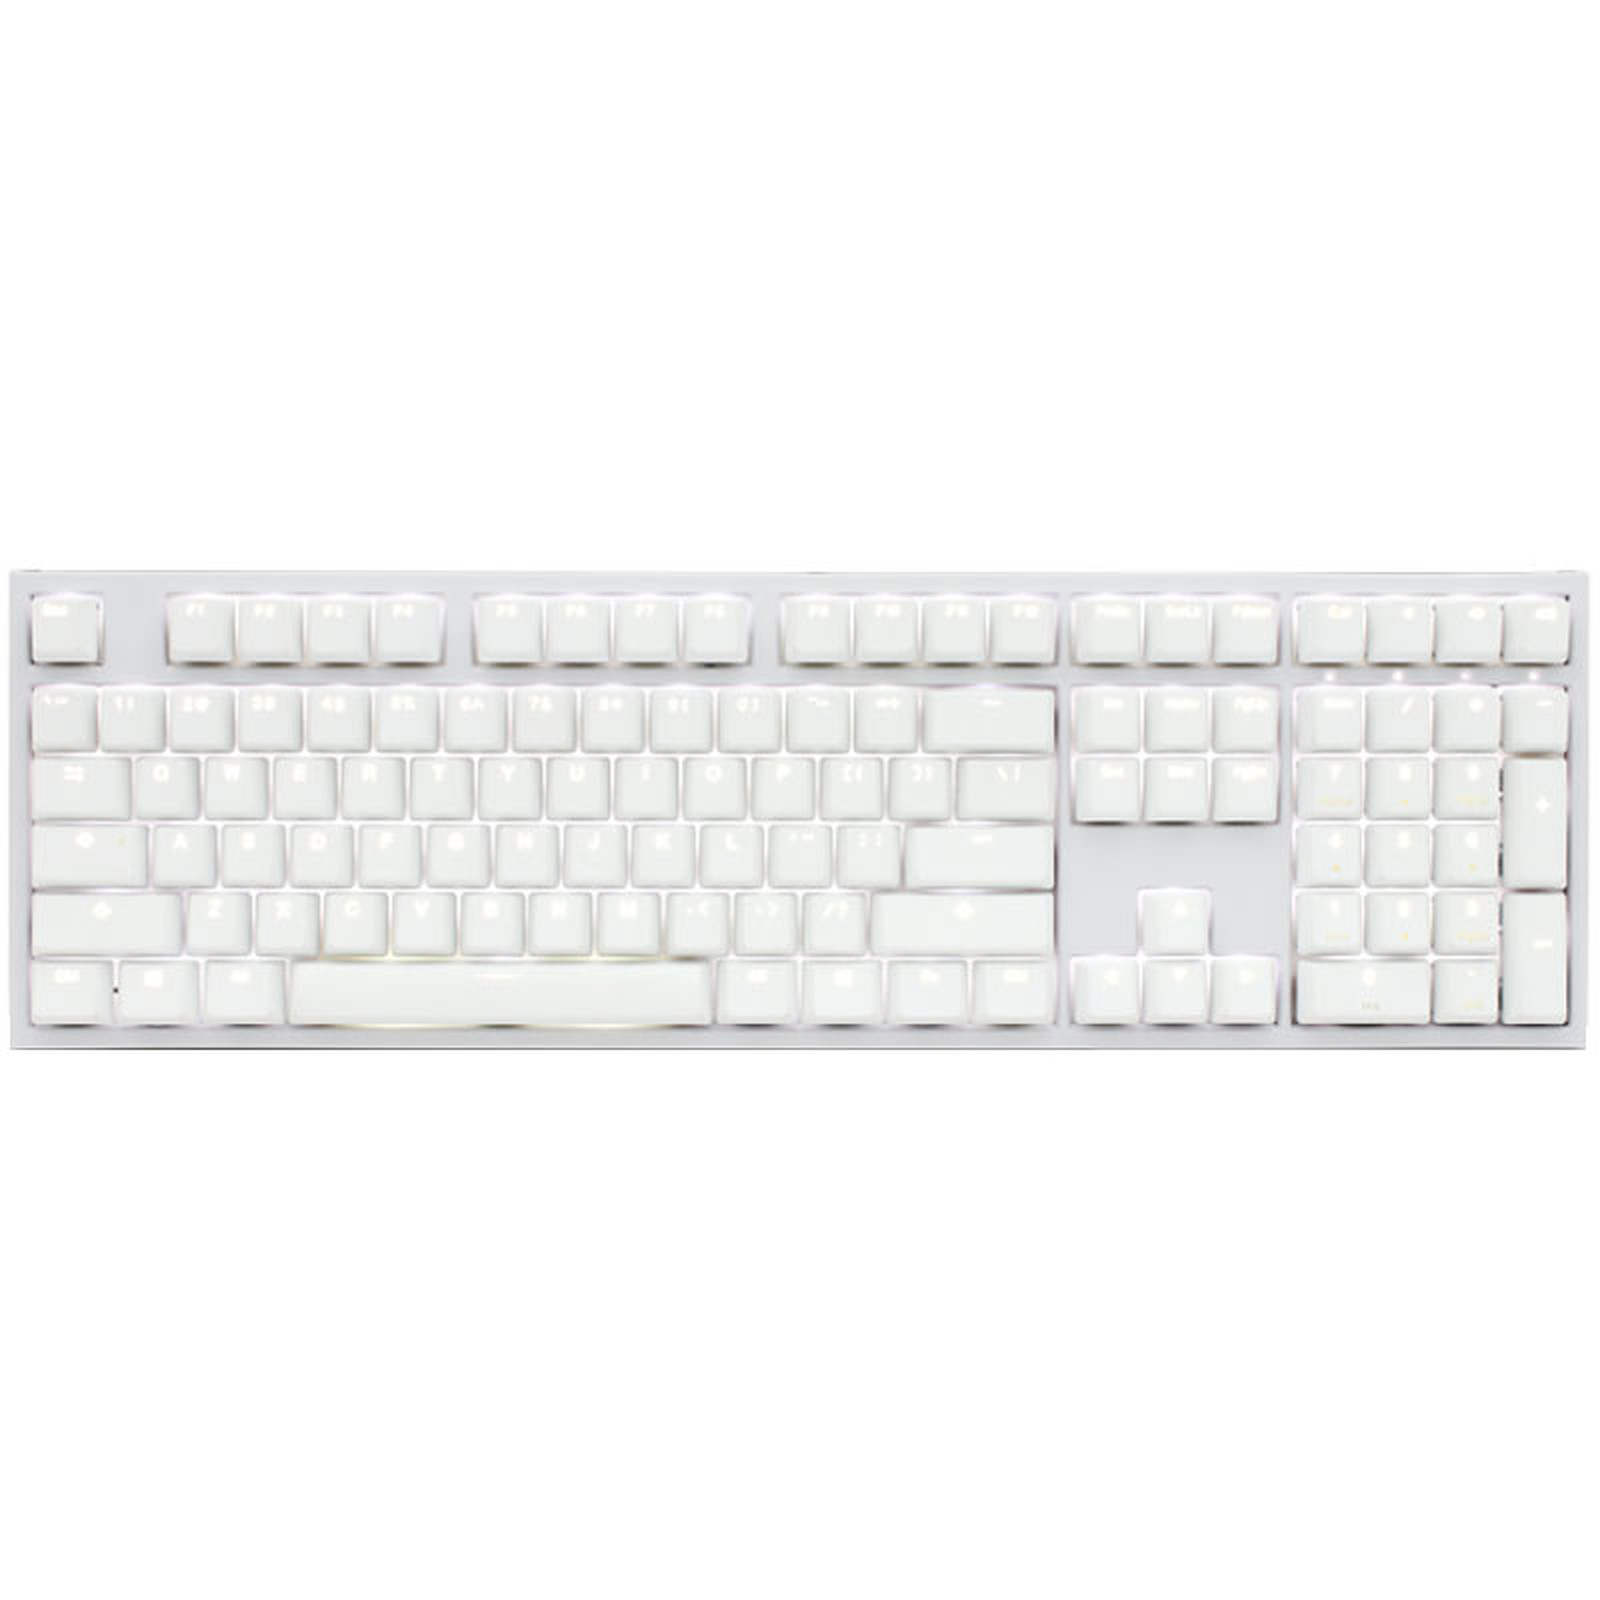 Ducky Channel One 2 Backlit (coloris blanc - Cherry MX Brown - LEDs blanches) - Clavier PC Ducky Channel